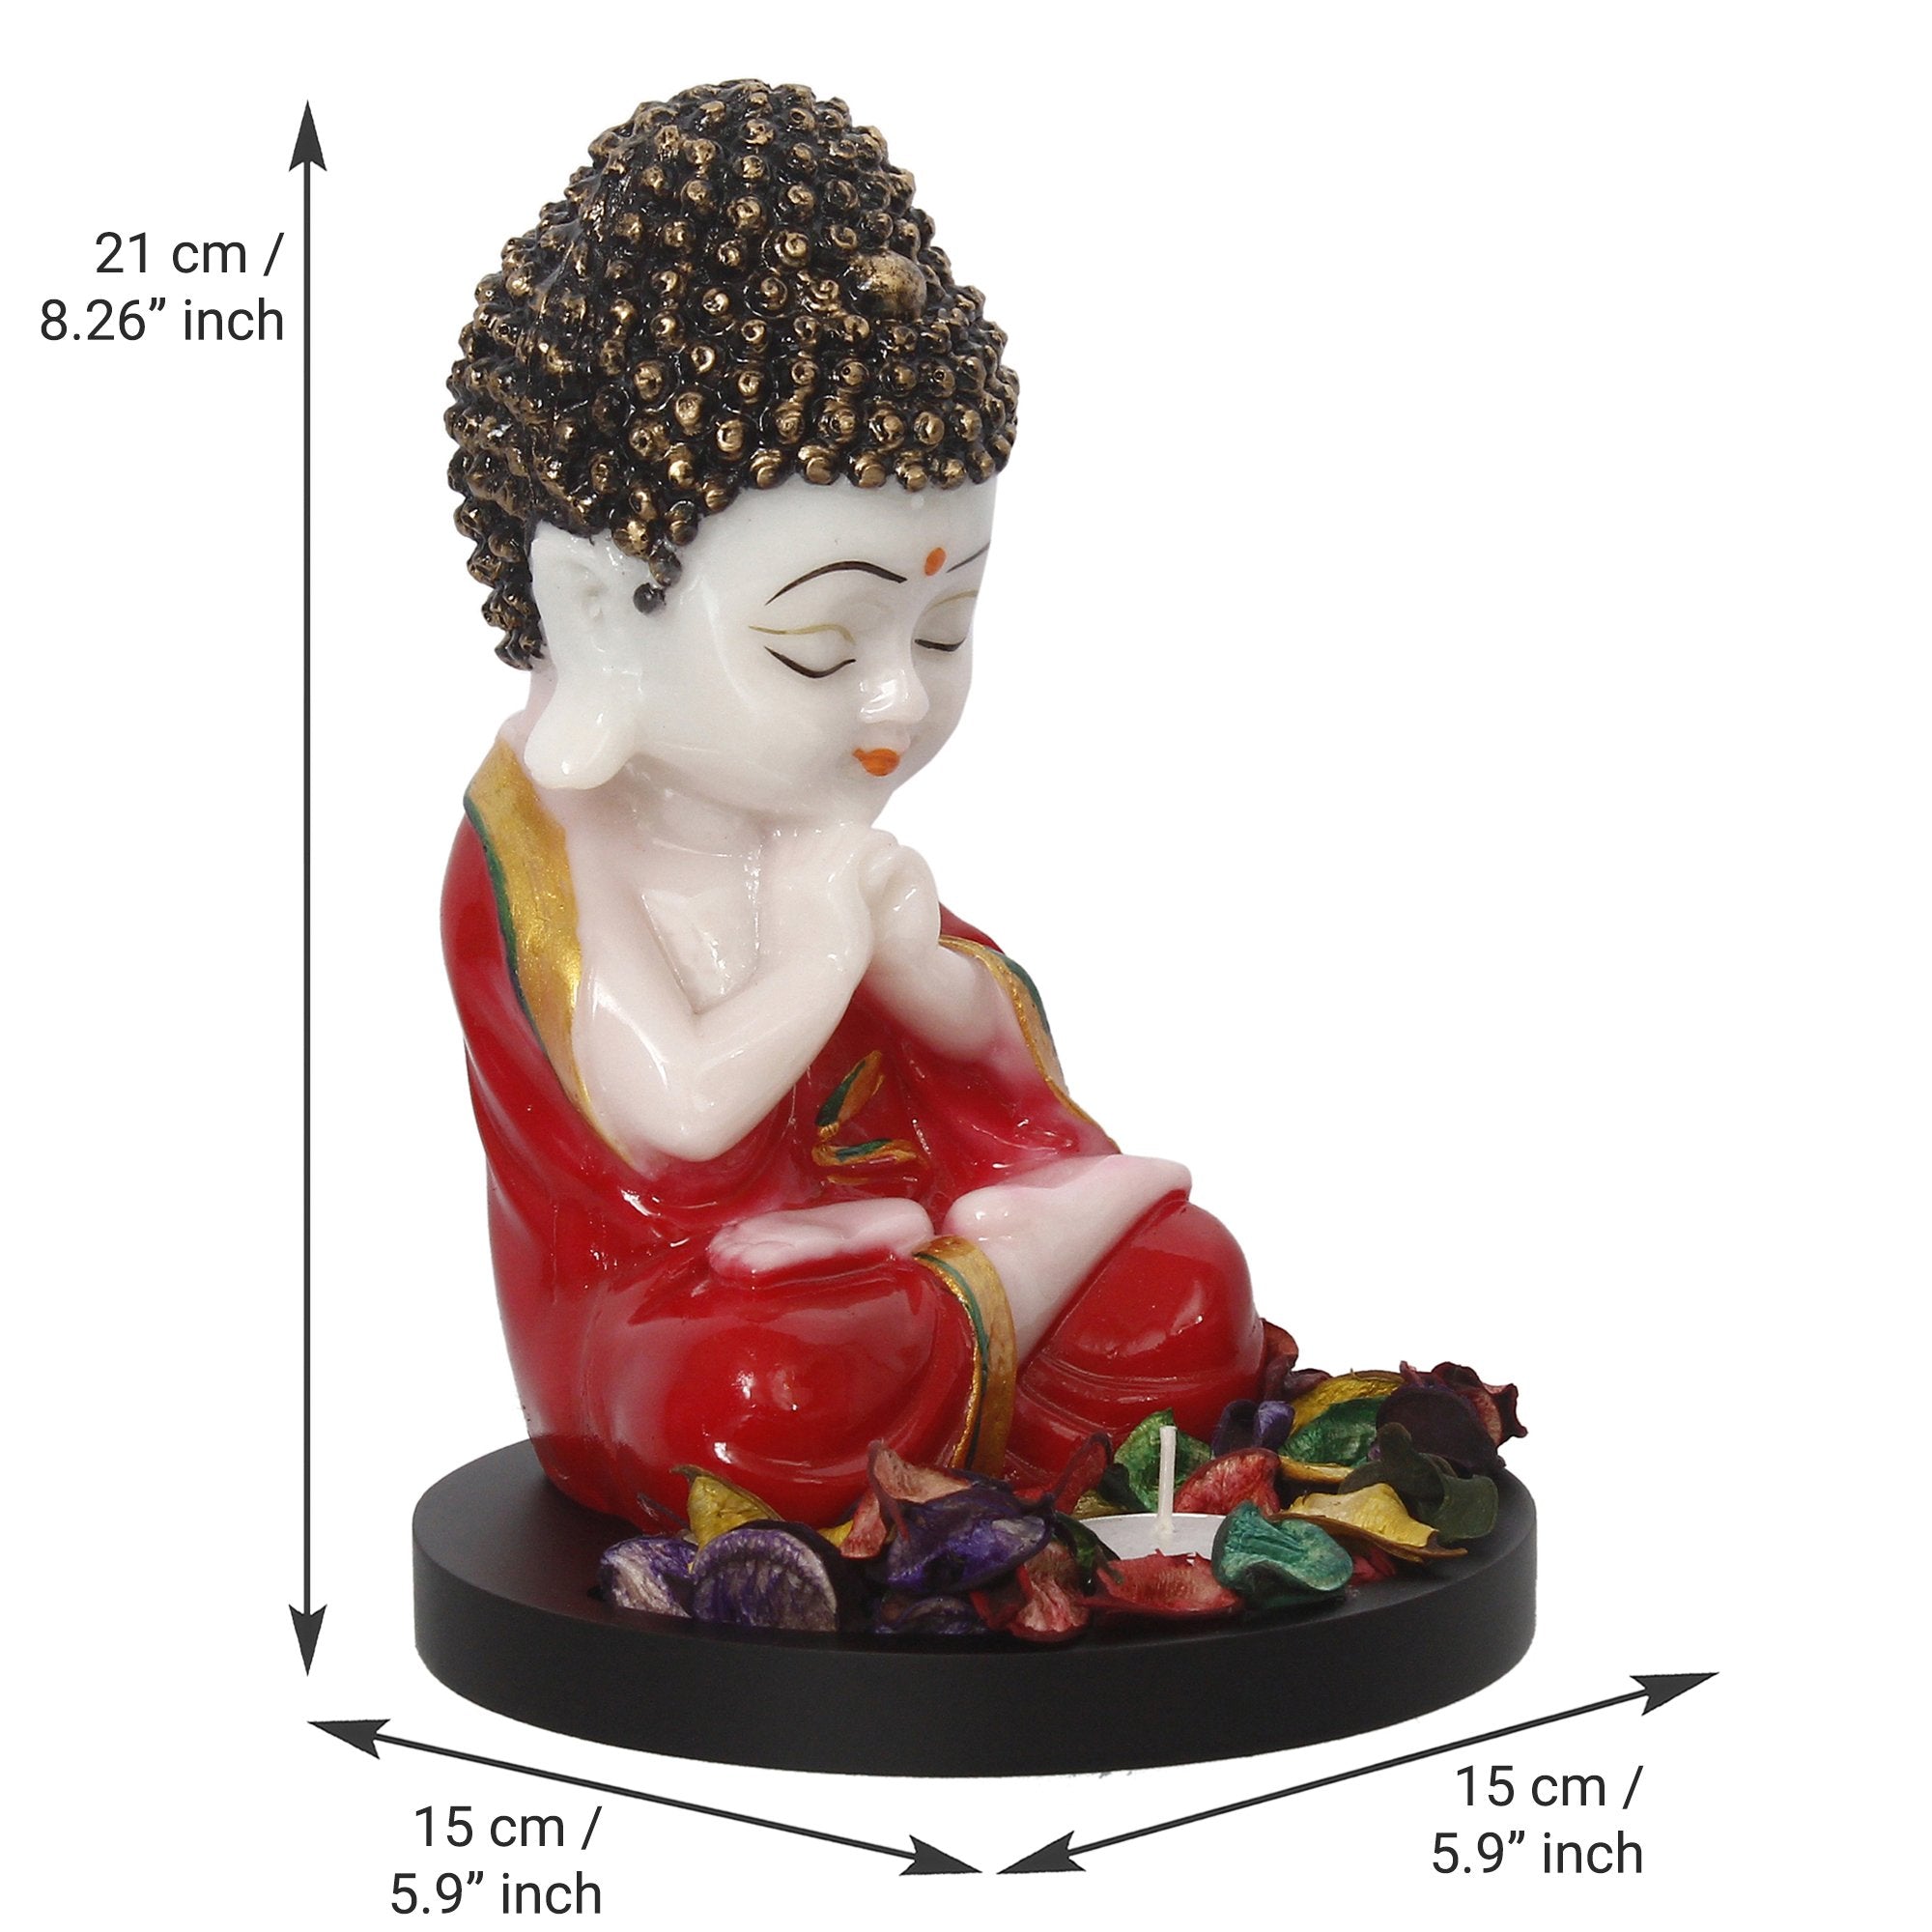 Designer Peacock Rakhi with Praying Red Monk Buddha with Wooden Base, Fragranced Petals and Tealight and Roli Chawal Pack, Best Wishes Greeting Card 3